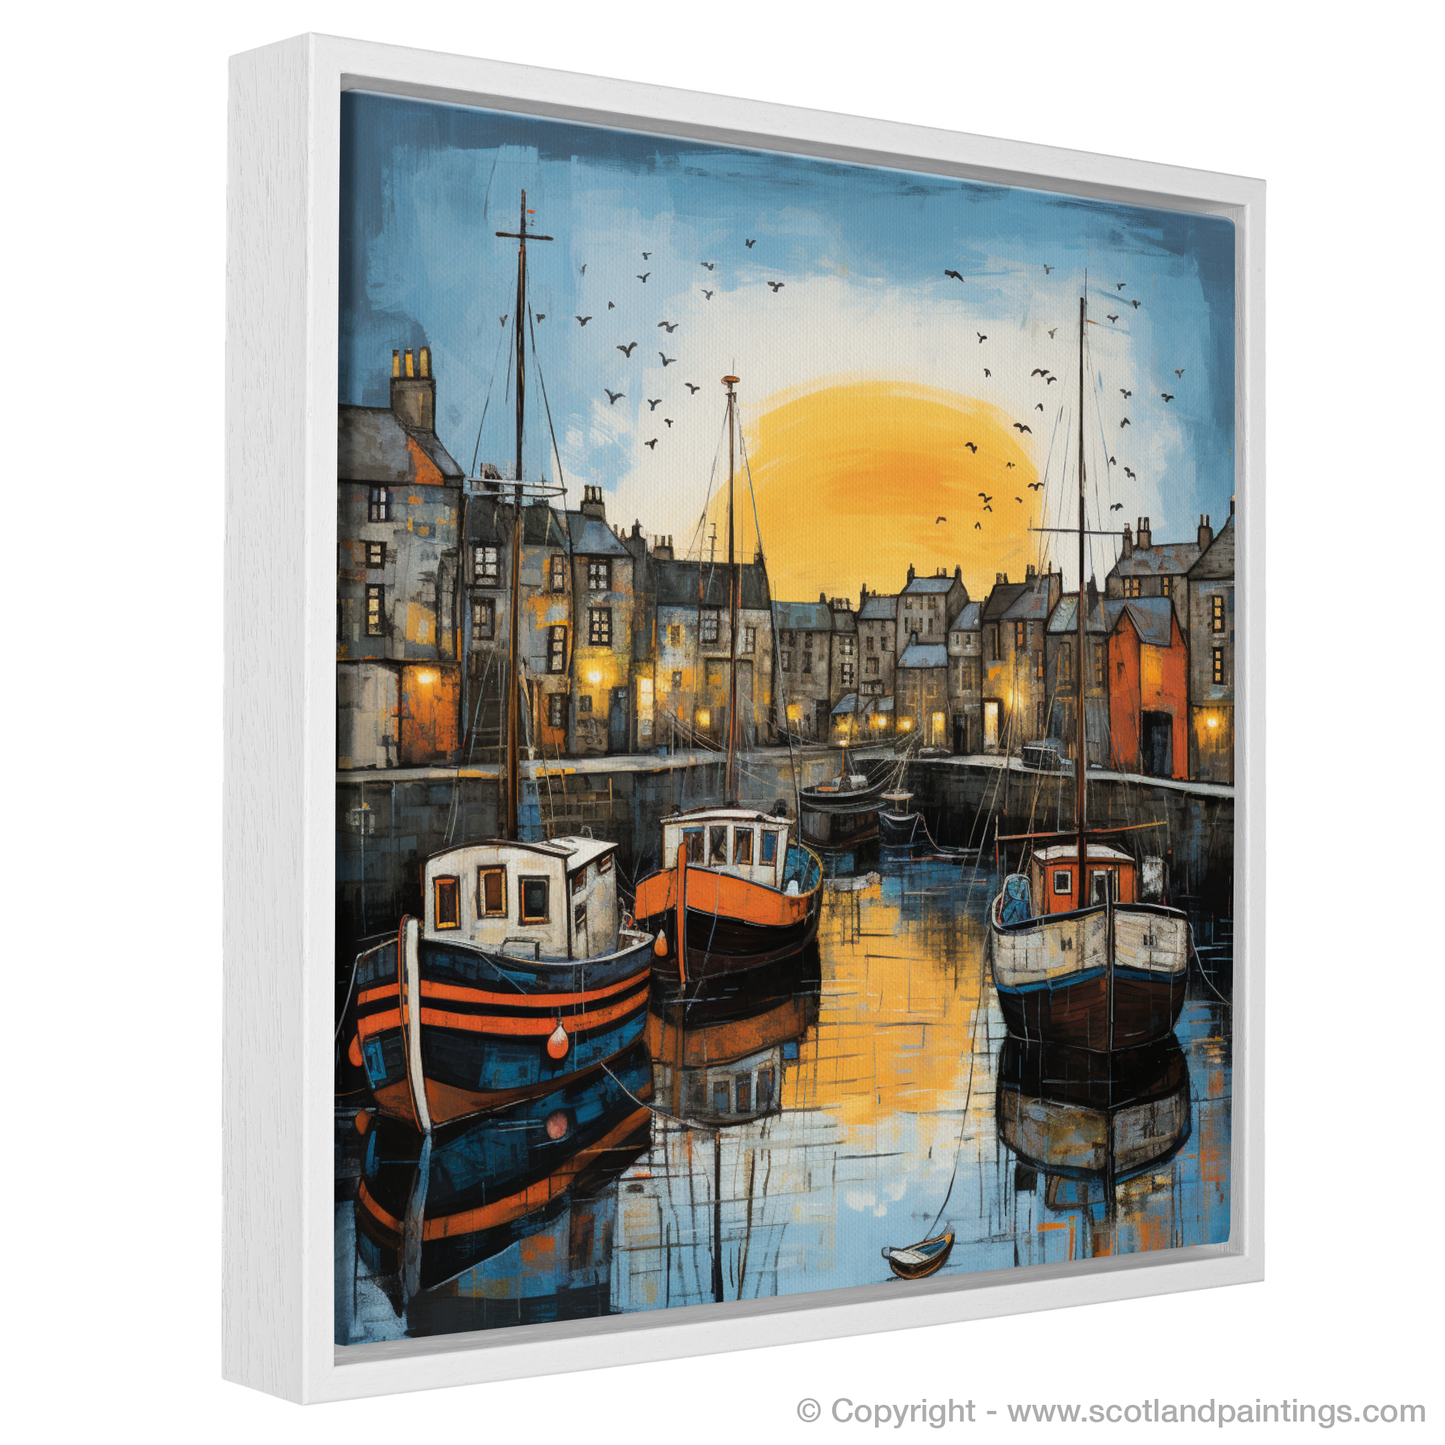 Dusk at Findochty Harbour: An Illustrative Expressionist Tribute